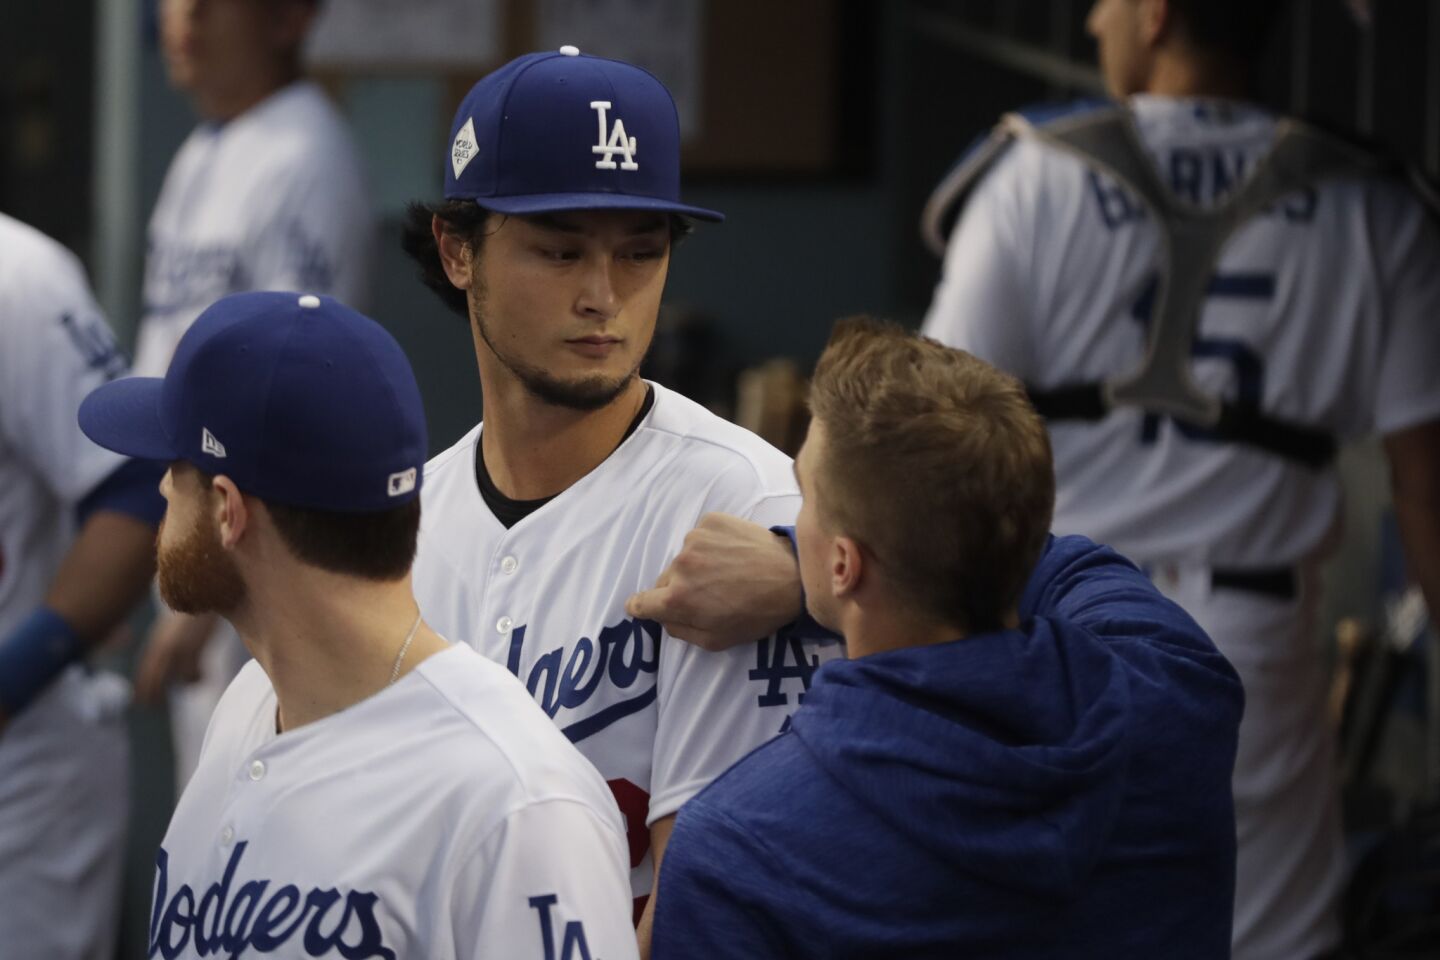 Enrique Hernandez encourages Yu Darvish in the dugout before the first pitch in Game 7 of the World Series at Dodger Stadium.